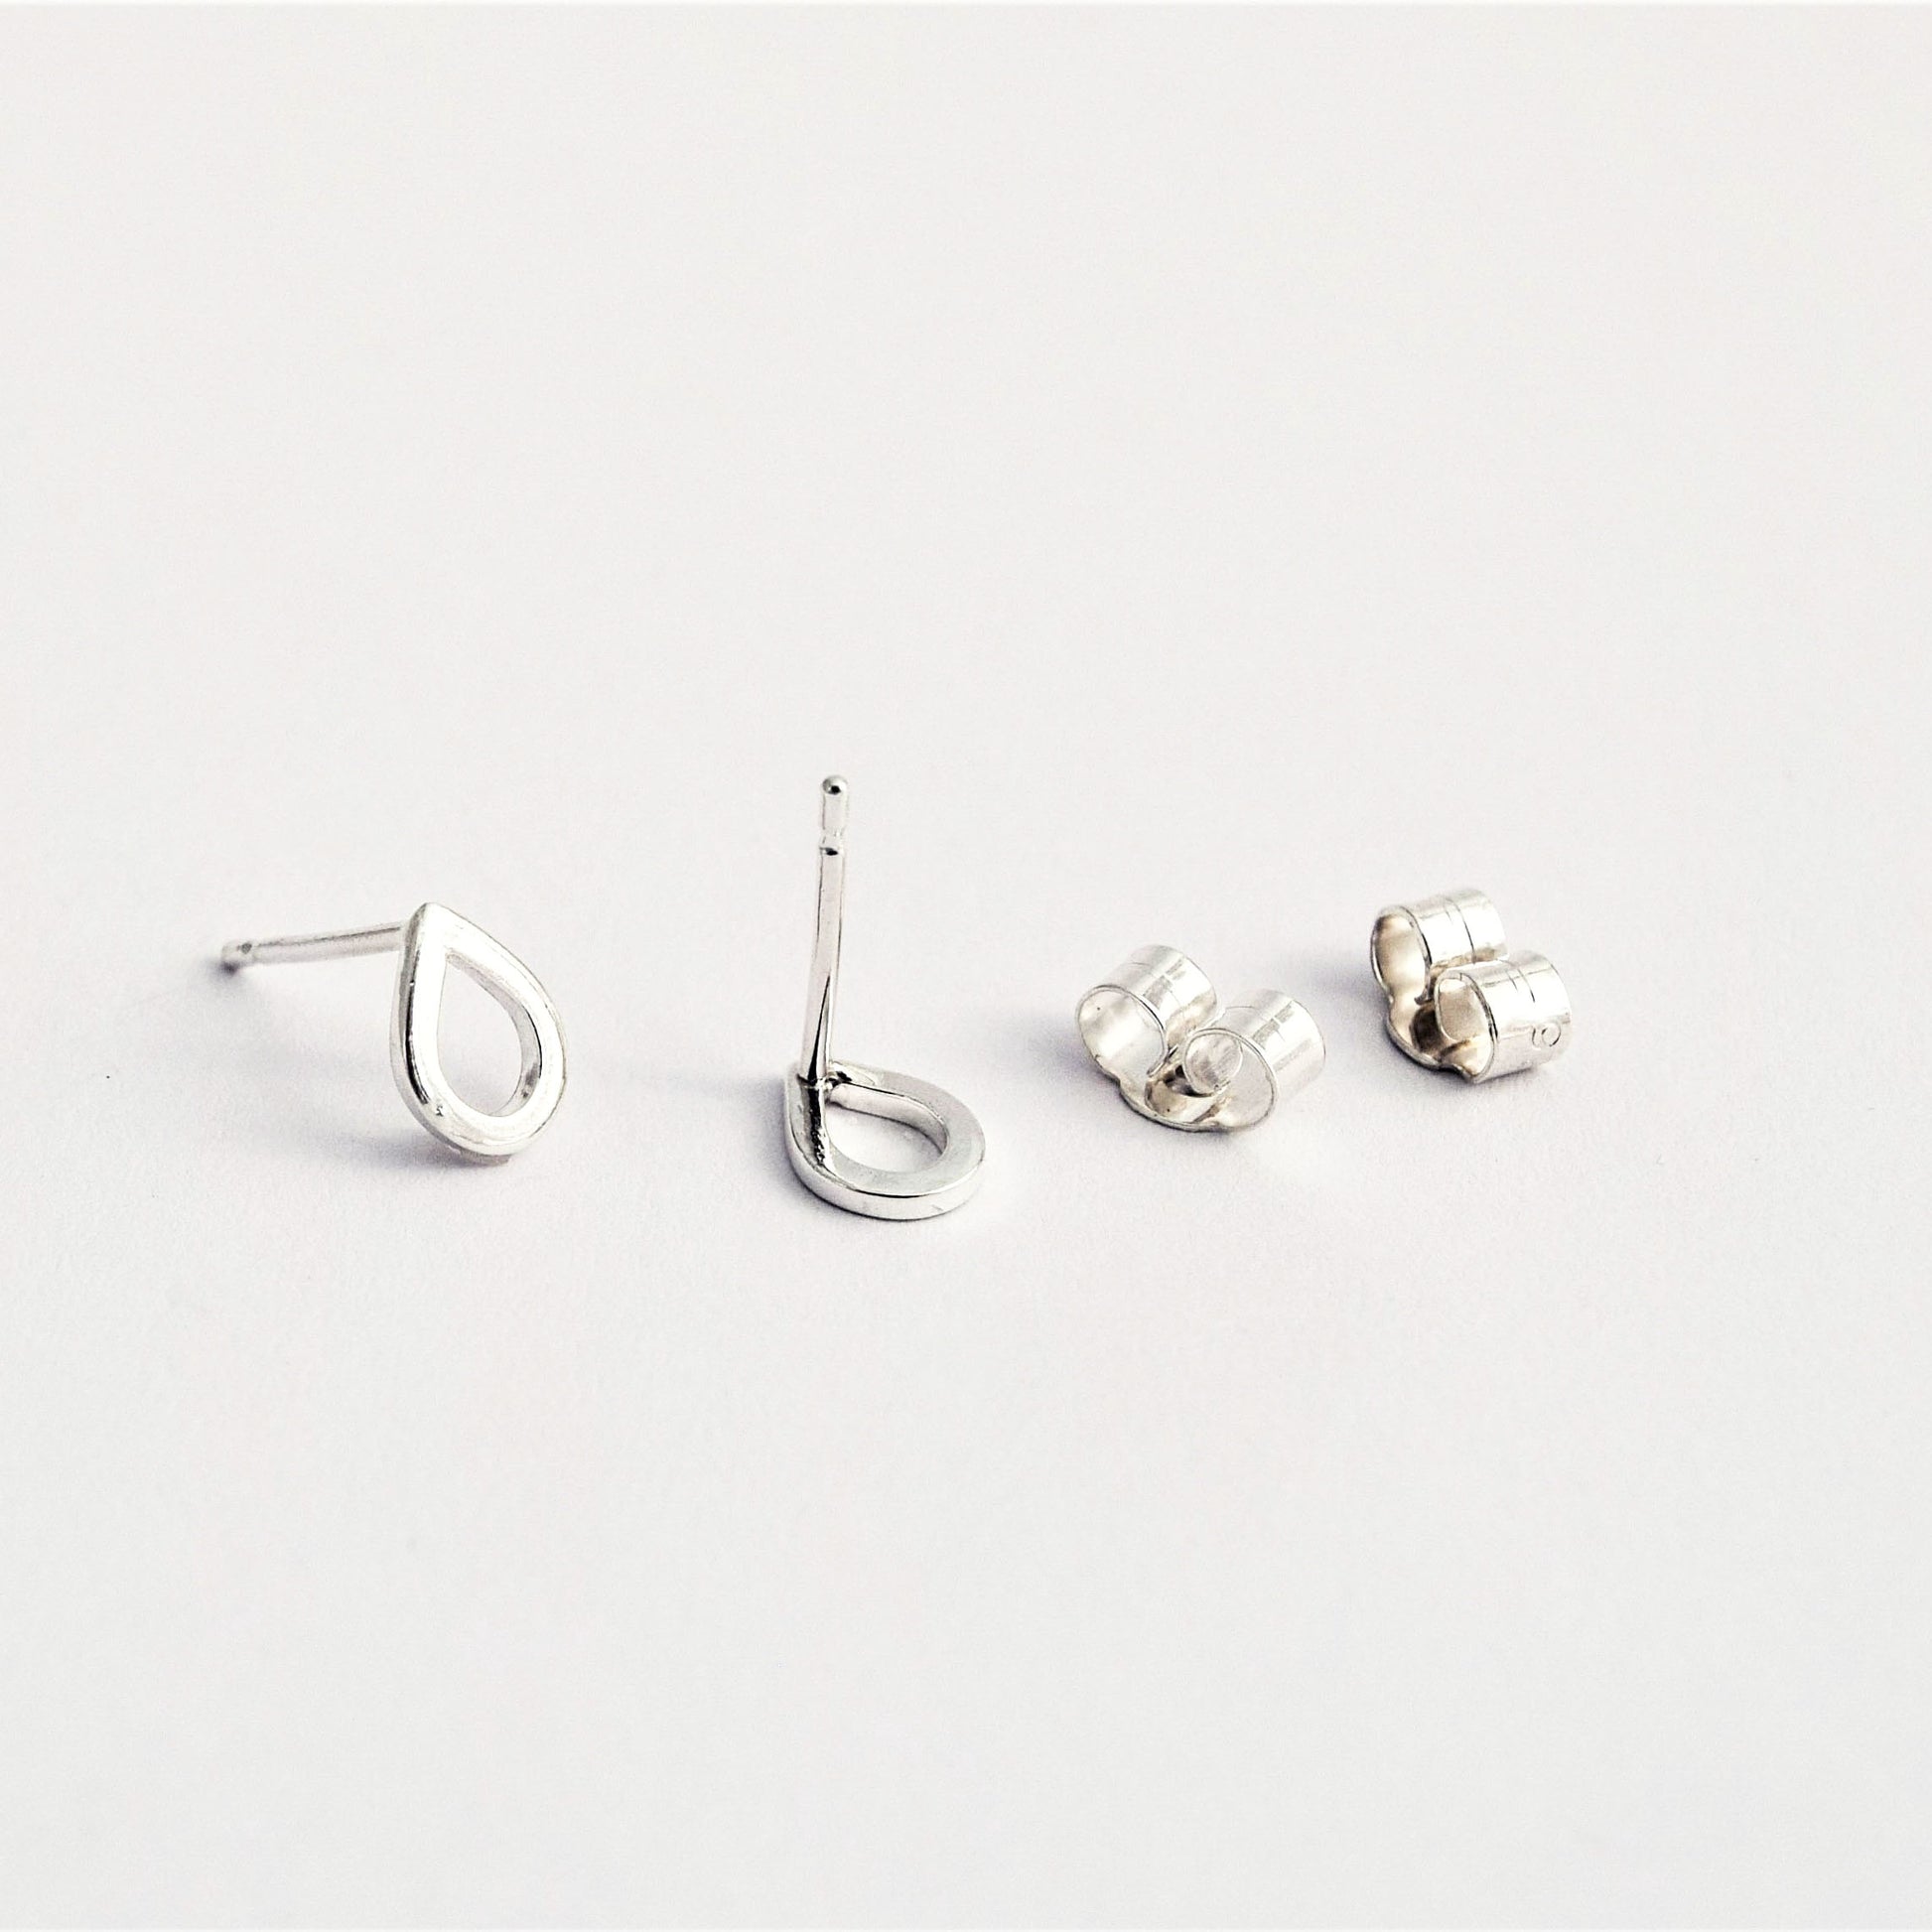 Close up product image showing teardrop studs with butterfly earring backs